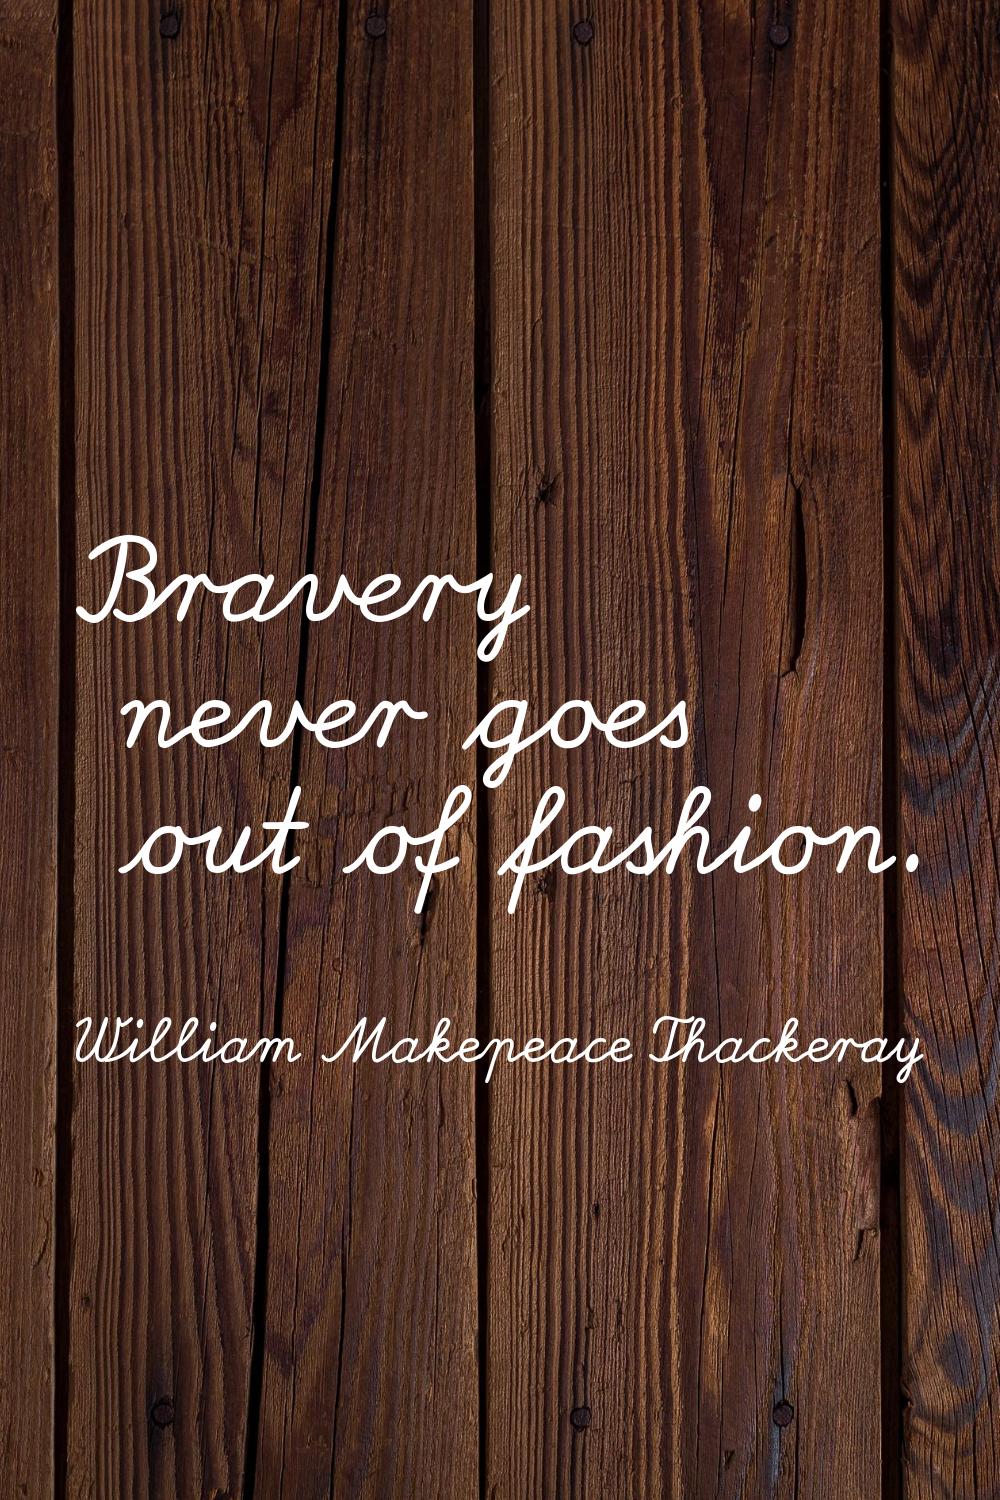 Bravery never goes out of fashion.